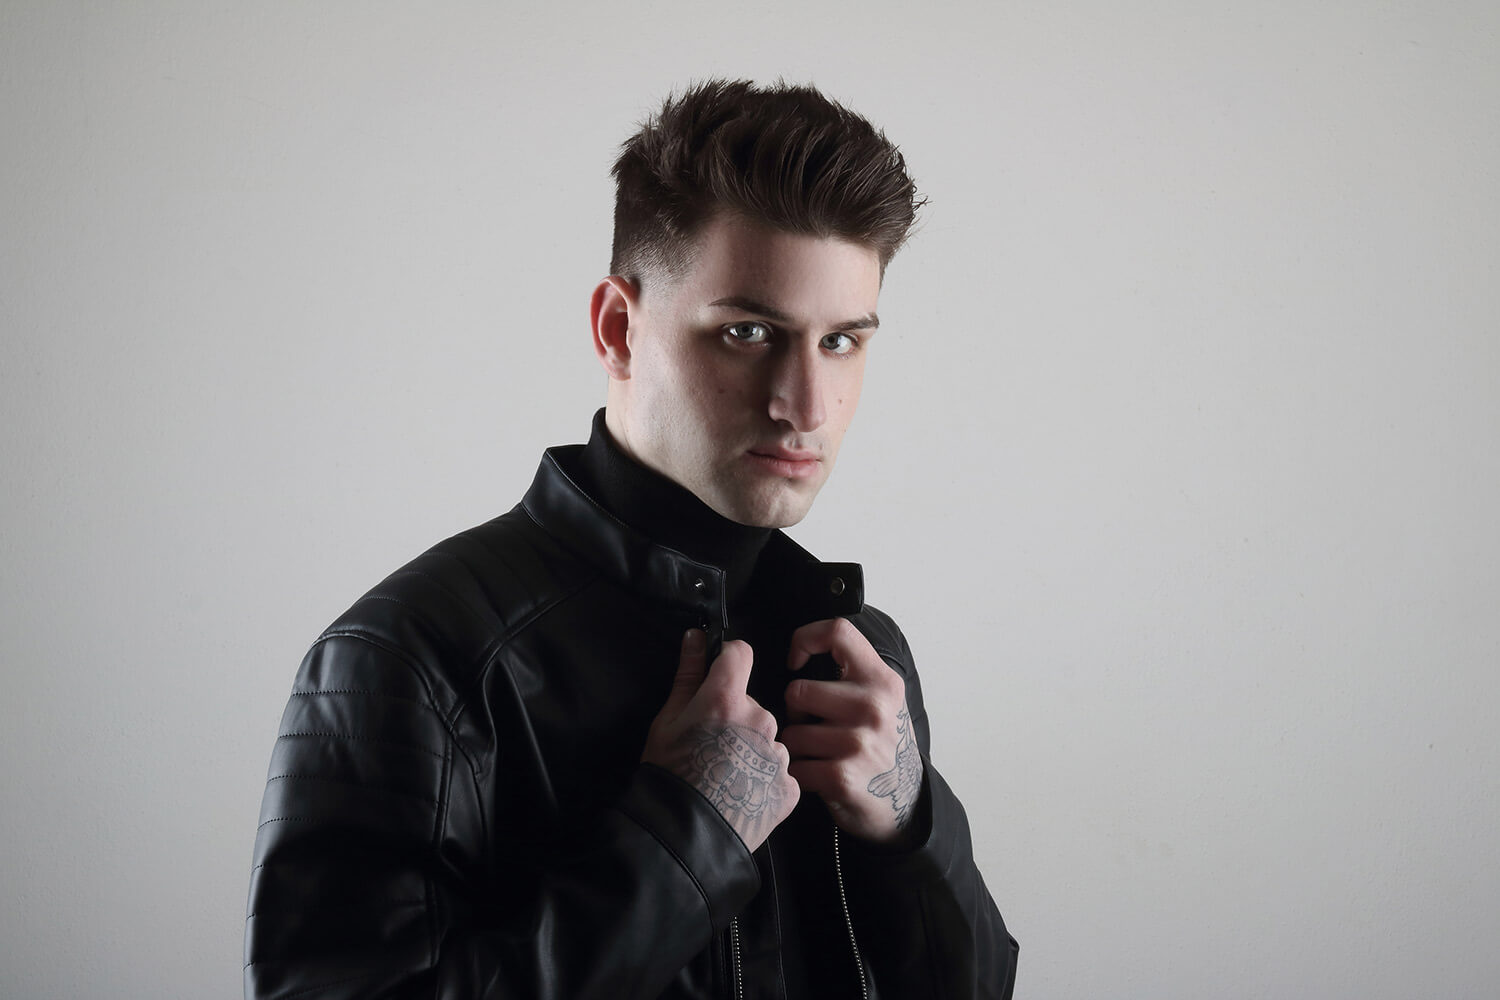 male portrait in a black turtleneck with a leather jacket and with a tattoo, on a light background